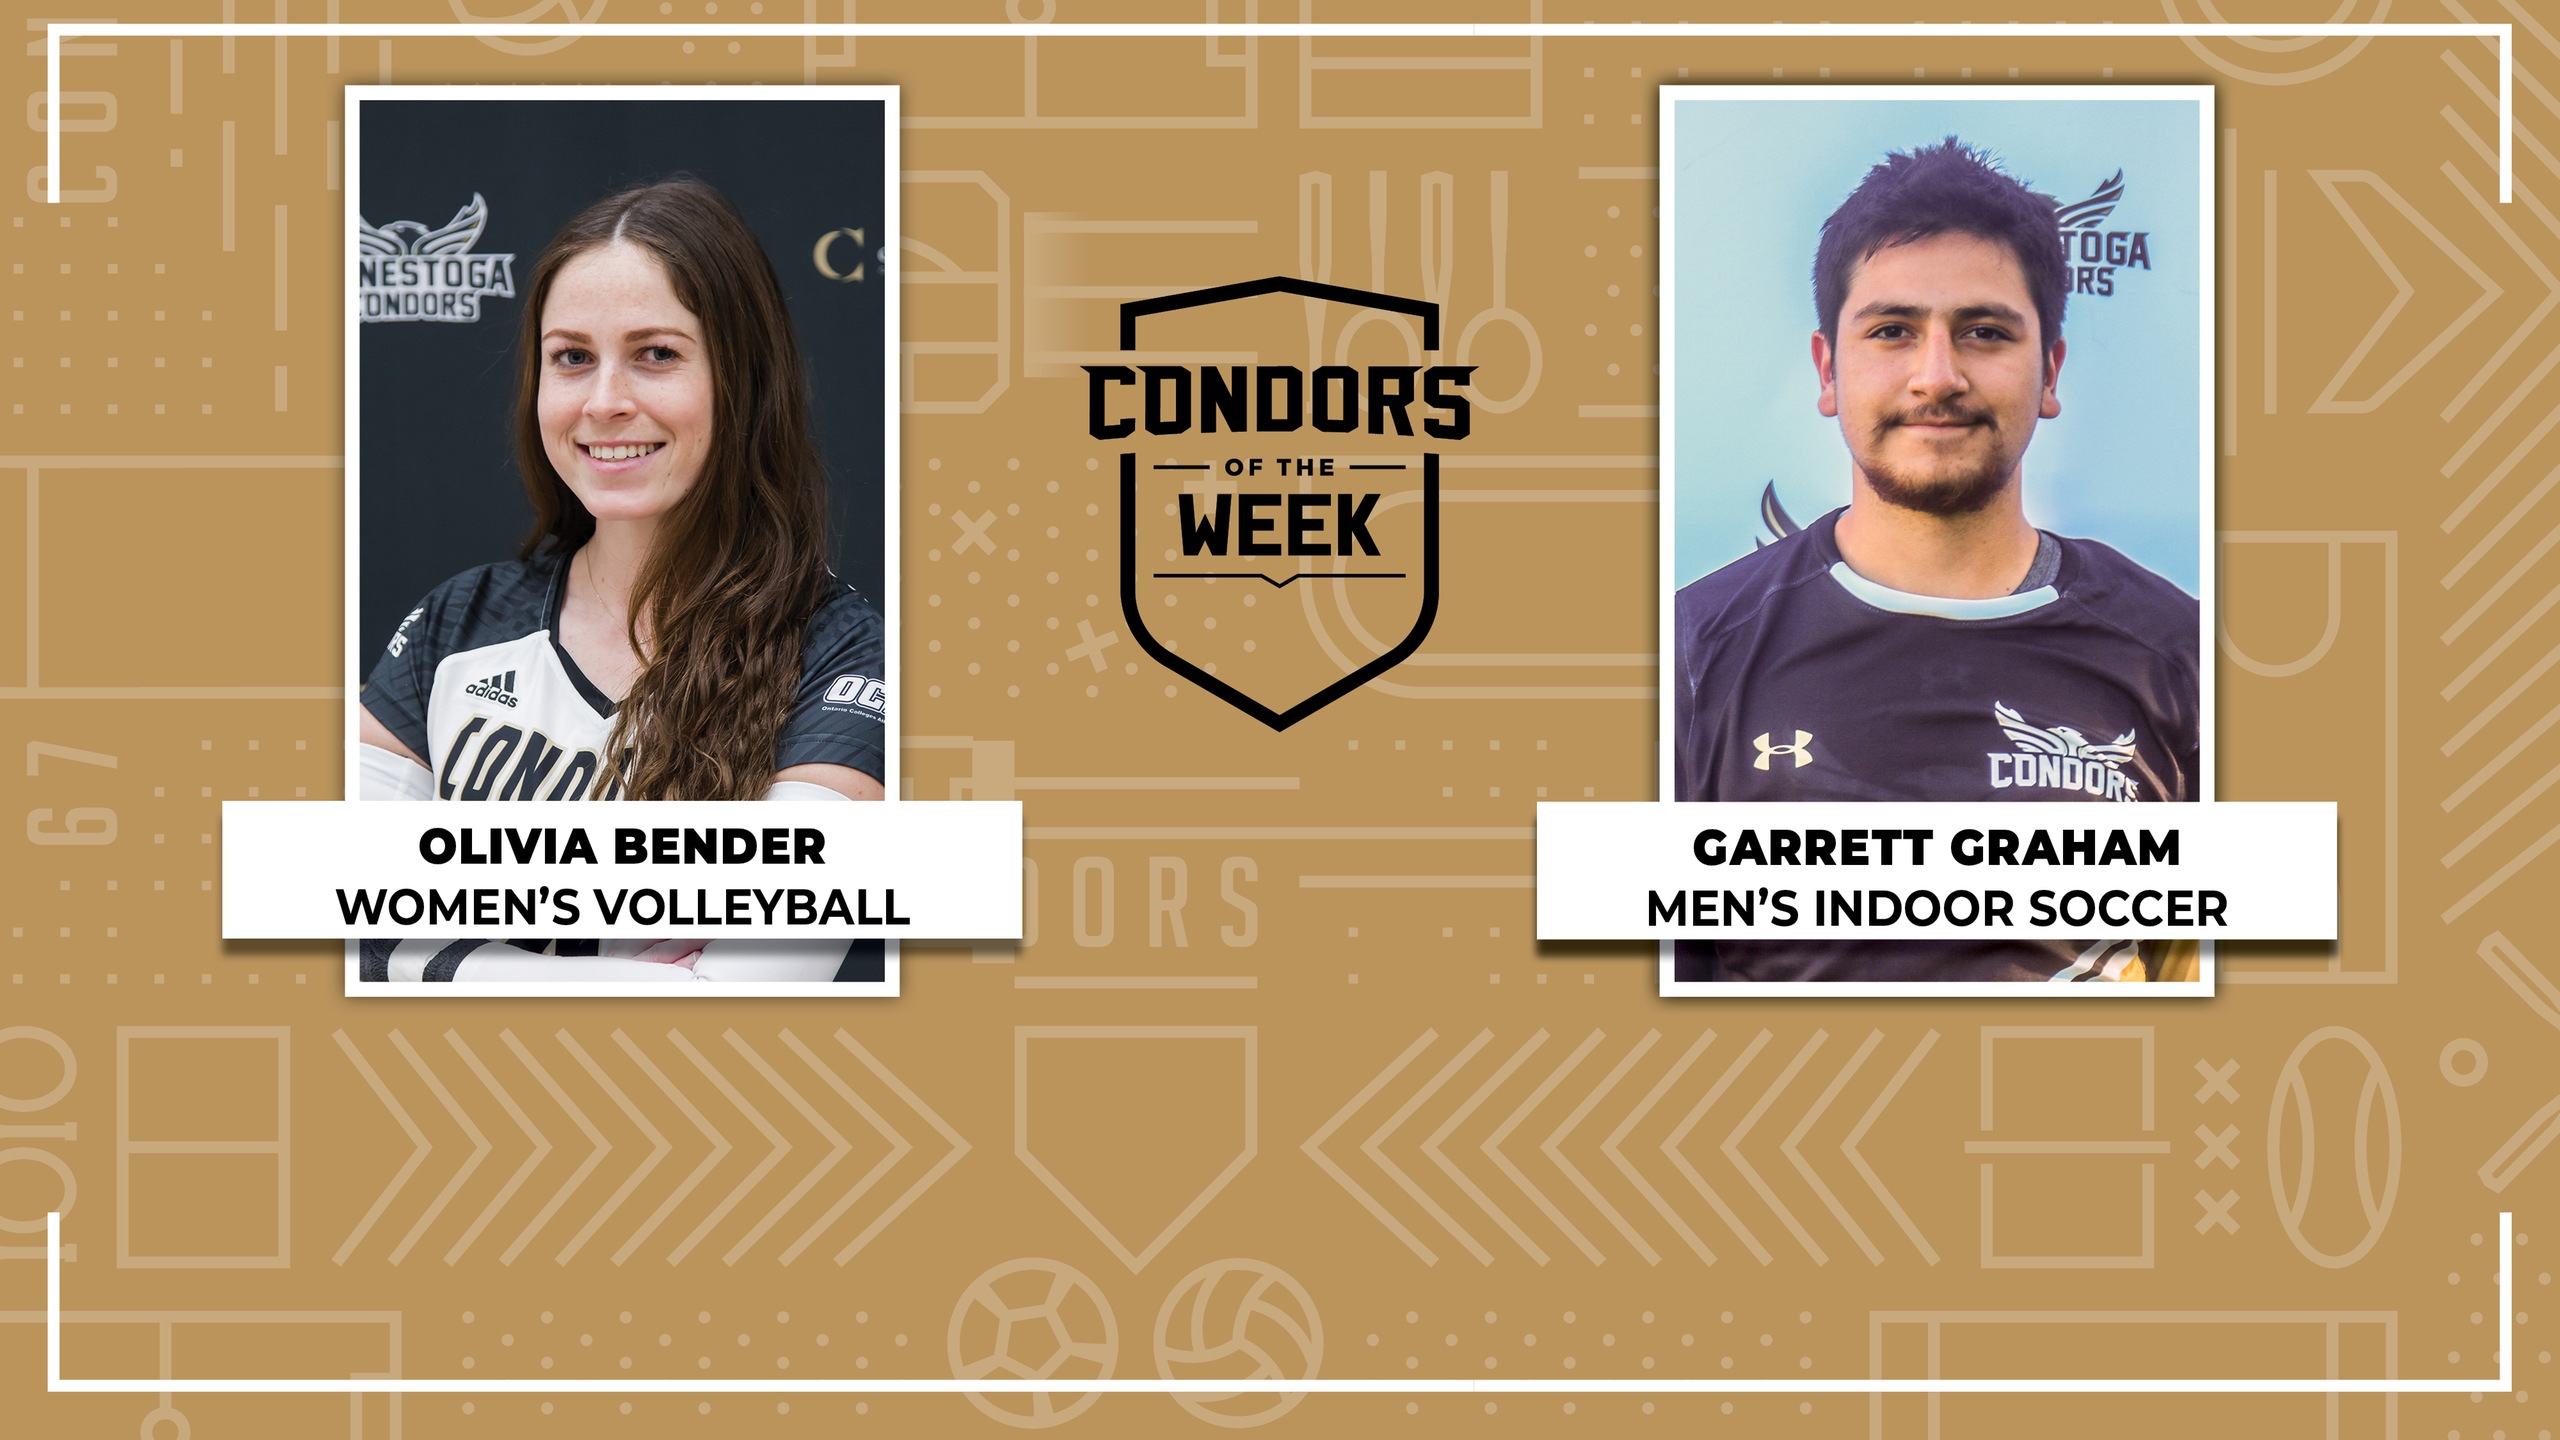 Bender & Graham are Condors Of The Week!